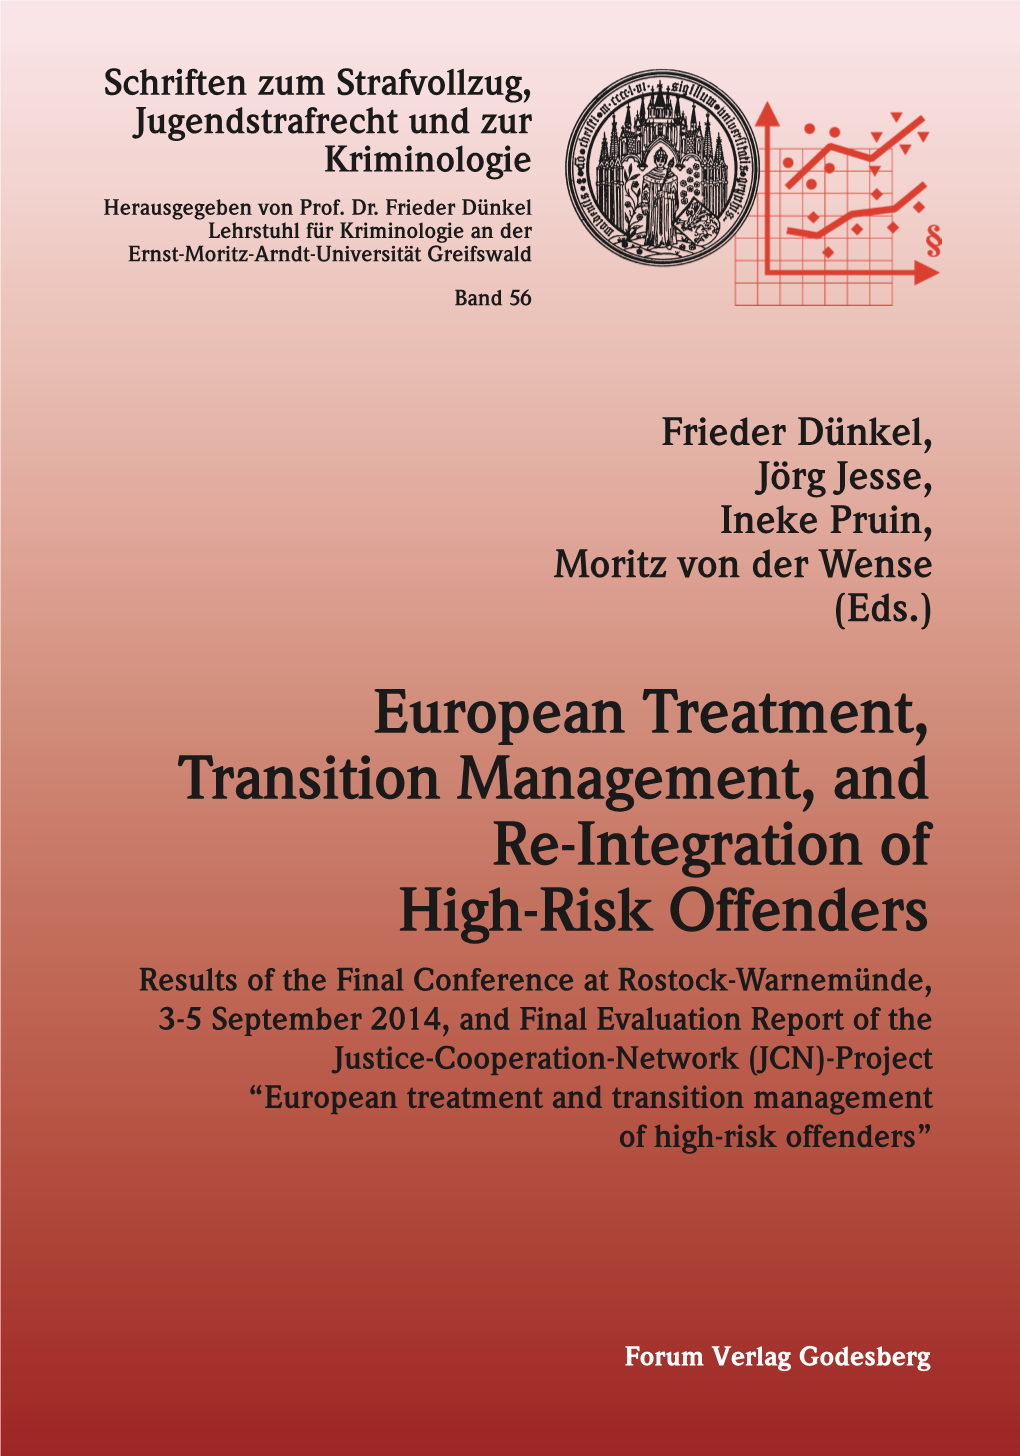 European Treatment, Transition Management, and Re-Integration of High-Risk Offenders